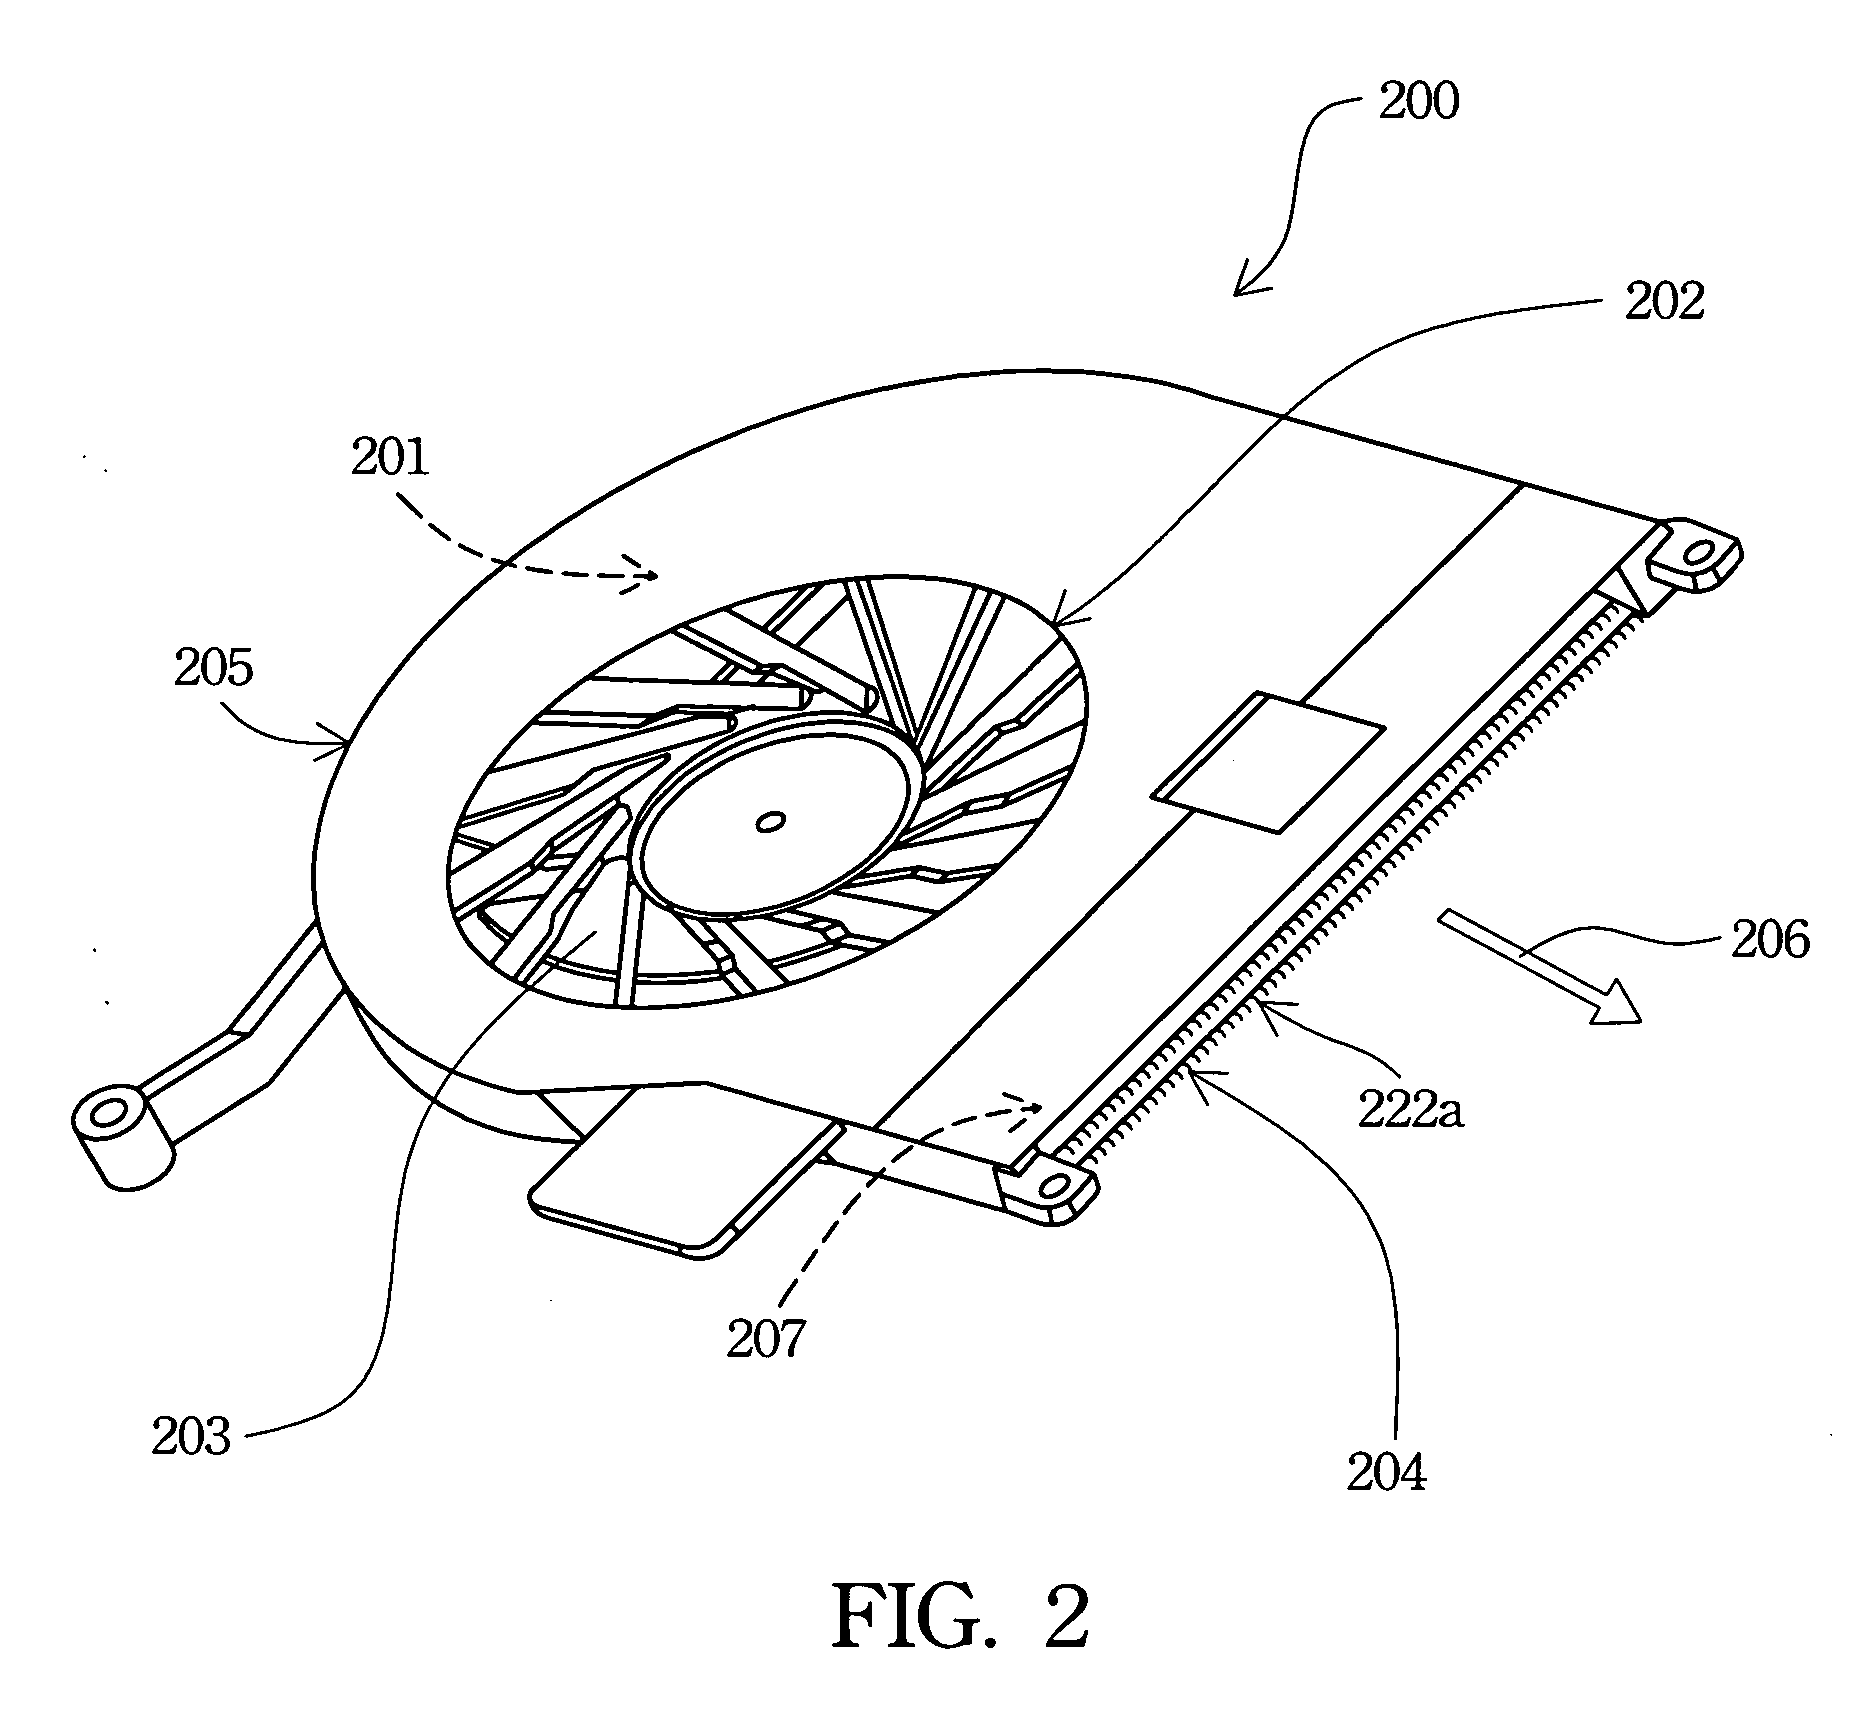 Heat dissipation module with noise reduction